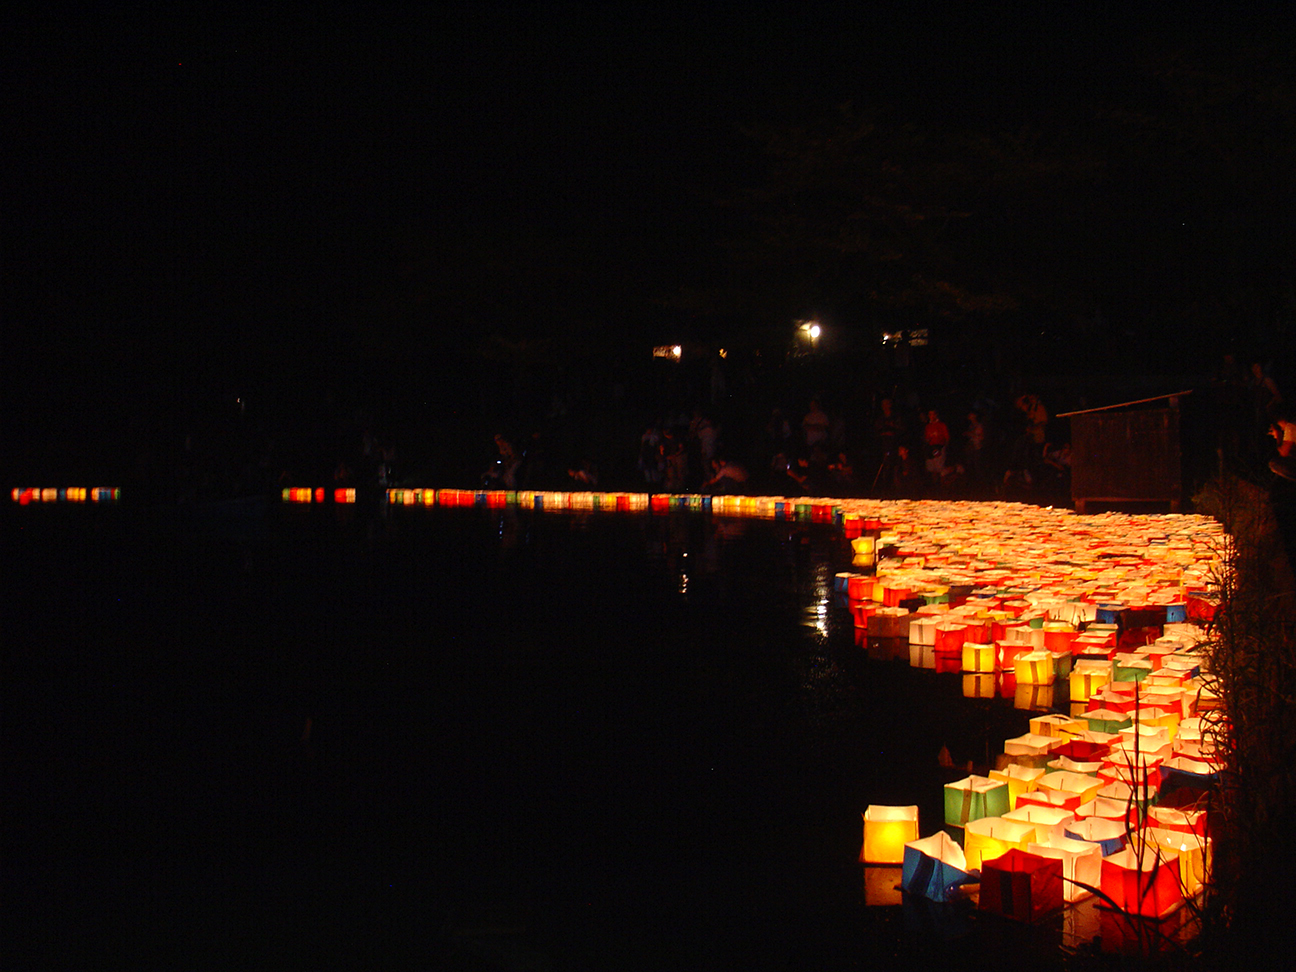 Many people came to look at the lanterns.